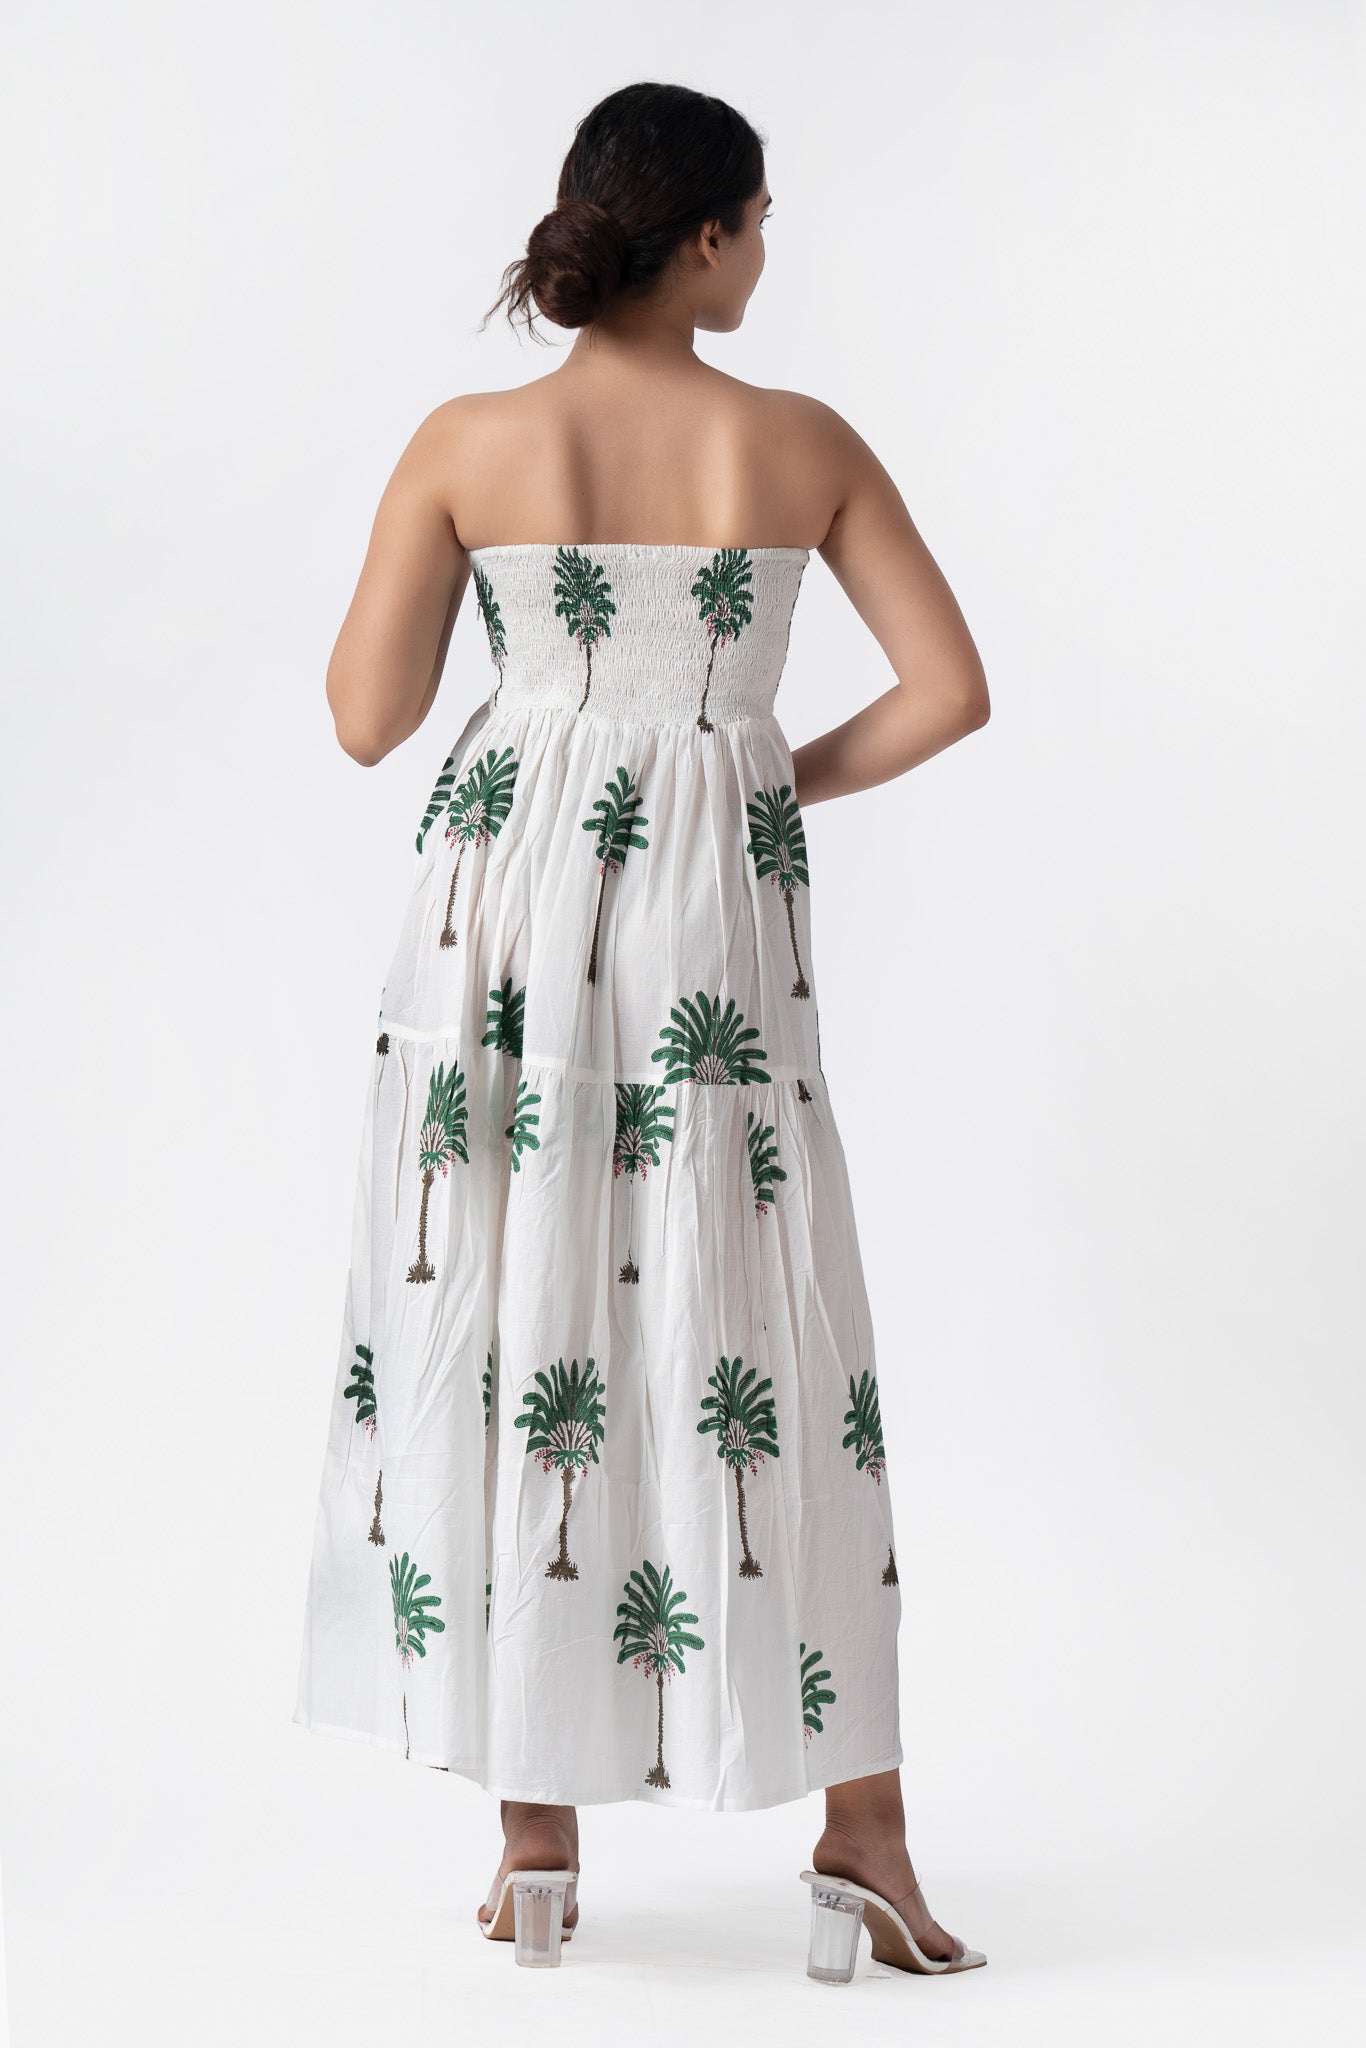 Fabricrush Tropical Palm Tree Printed Off-Shoulder Ankle-Length Dress with Chain Detail Gift for Her